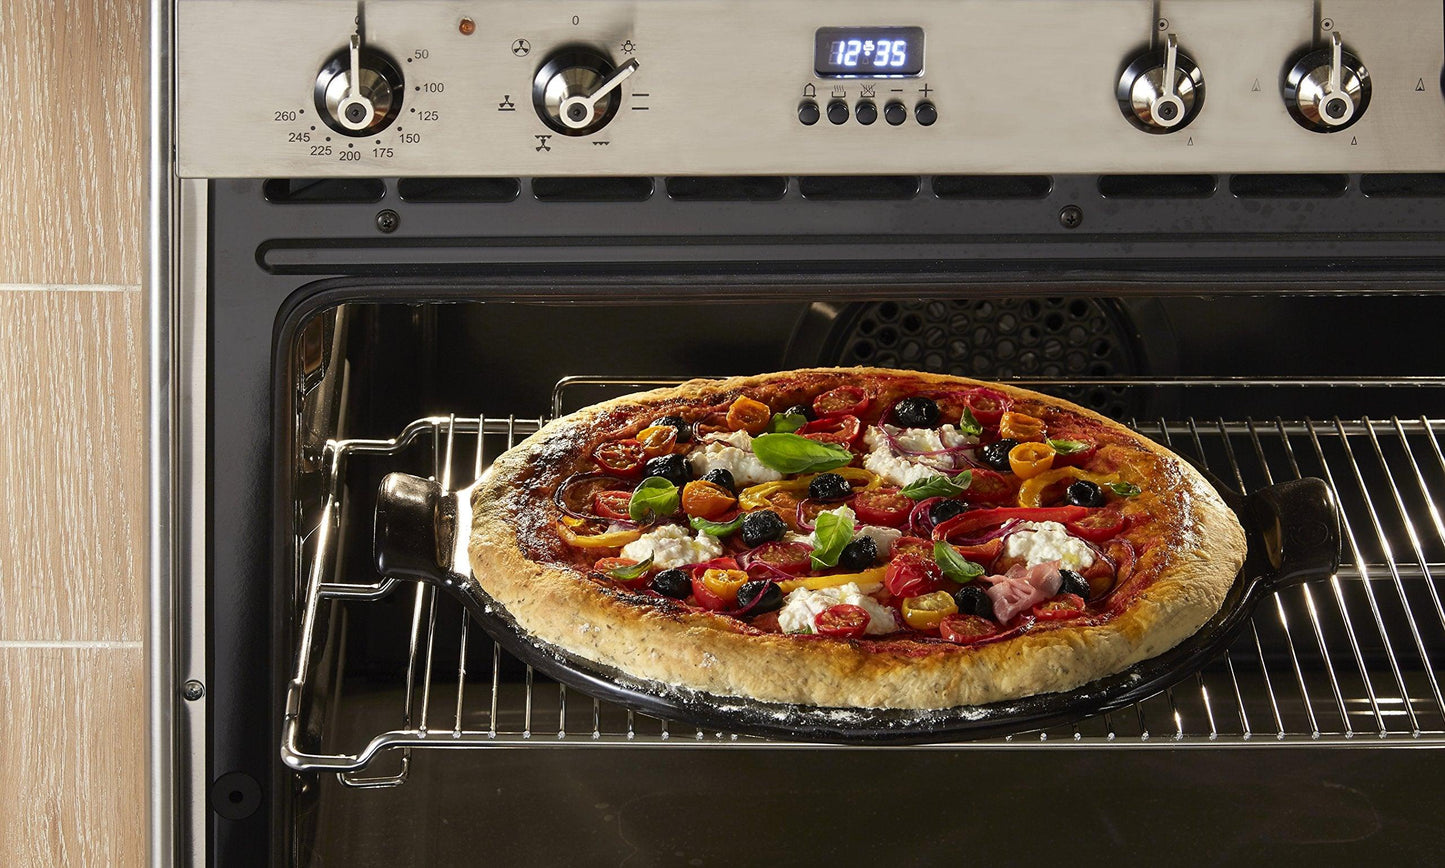 Emile Henry Made in France Flame Top Pizza Stone, Black. Perfect for Pizzas or Breads. In the Oven, On Top of the BBQ. Safe up to 750 degrees F. 100% Natural Clay, Glazed Surface. Easy to Clean. - CookCave